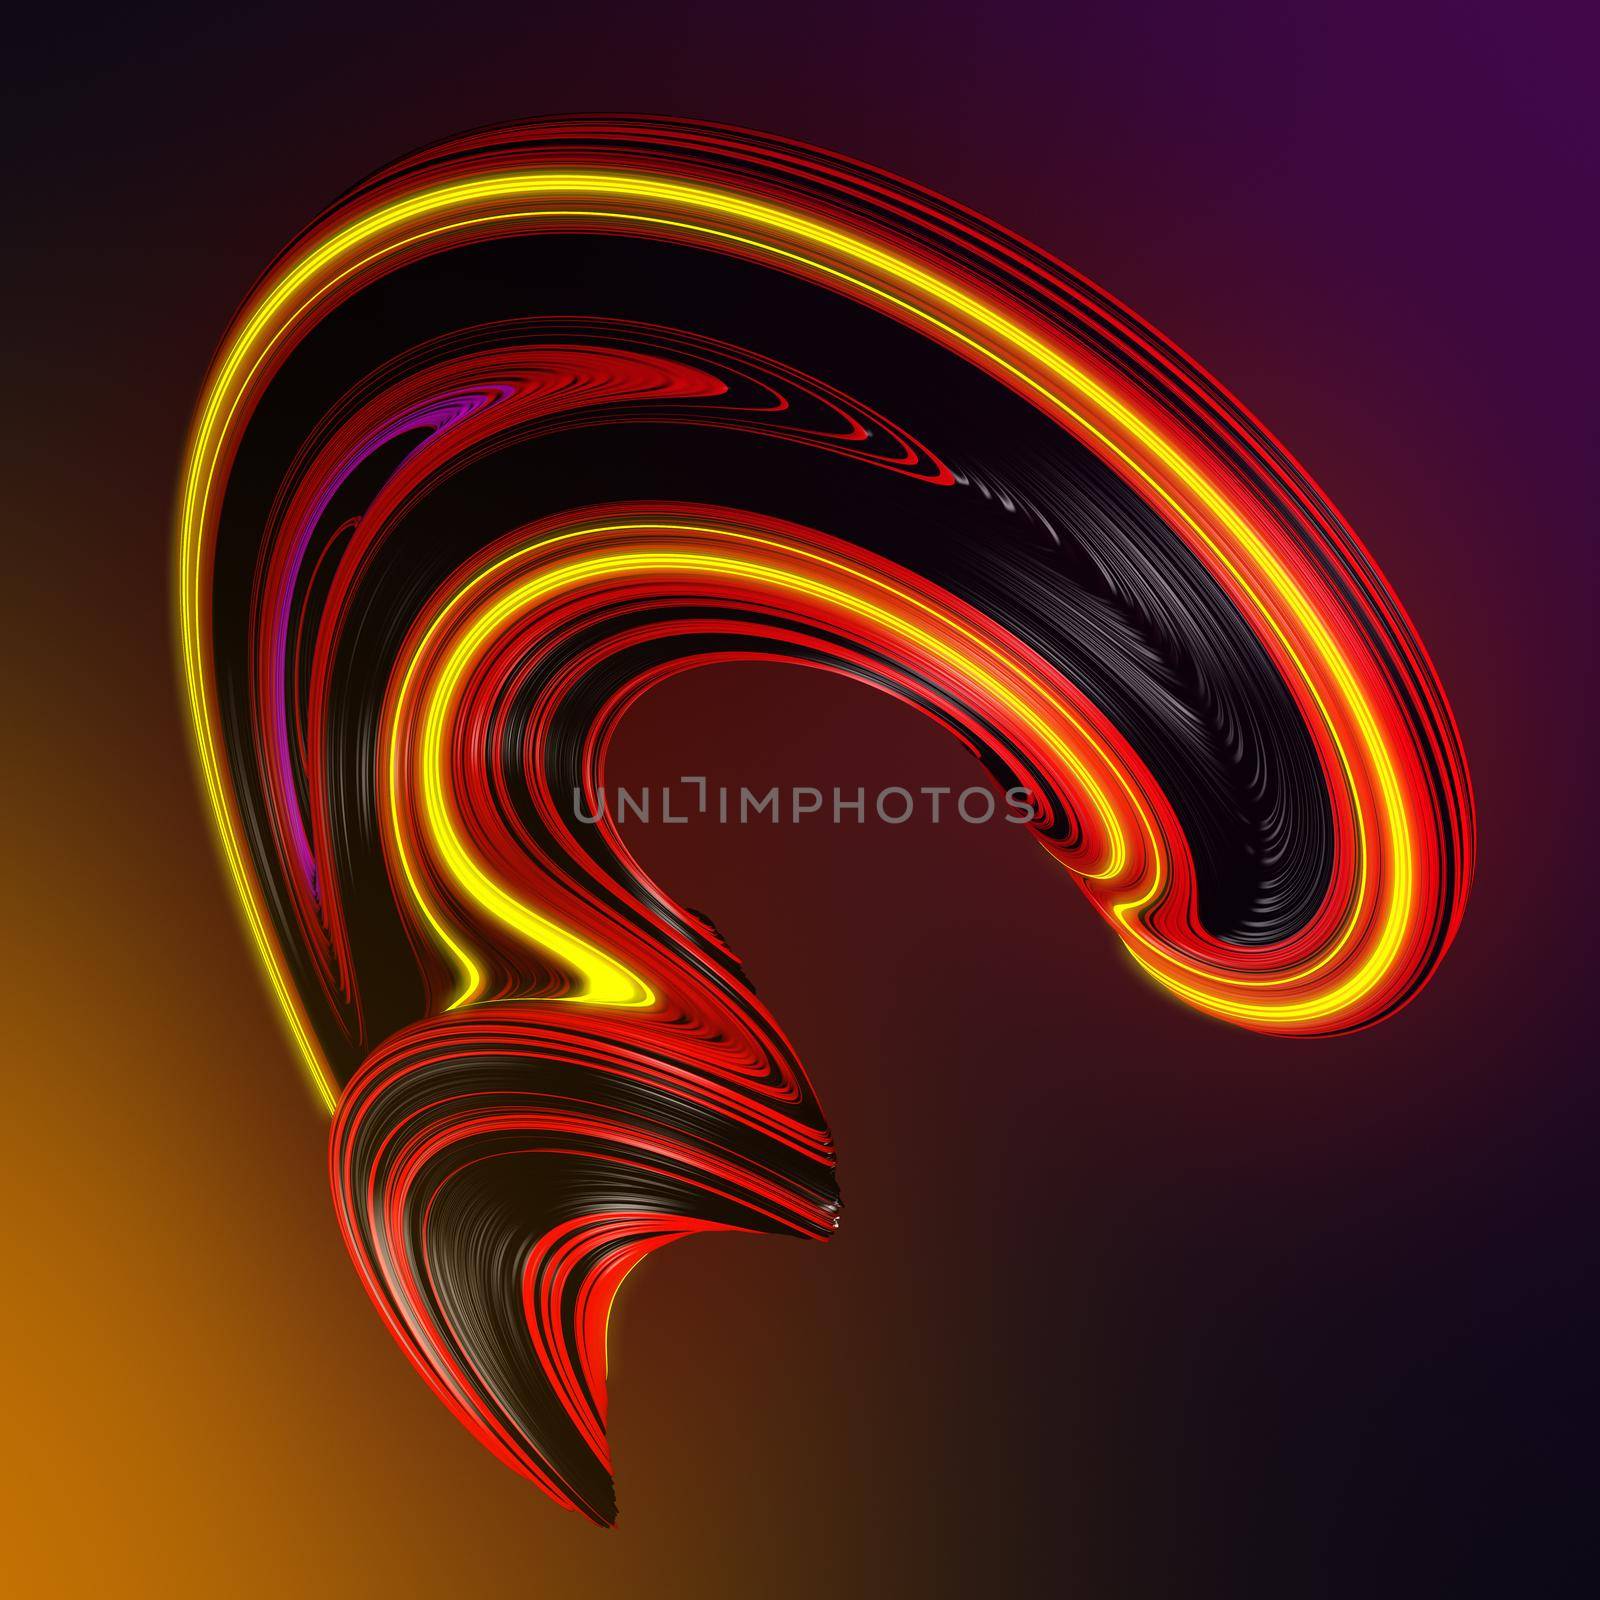 Futuristic colored abstract twisted shape on a vibrant color background. 3D render illustration